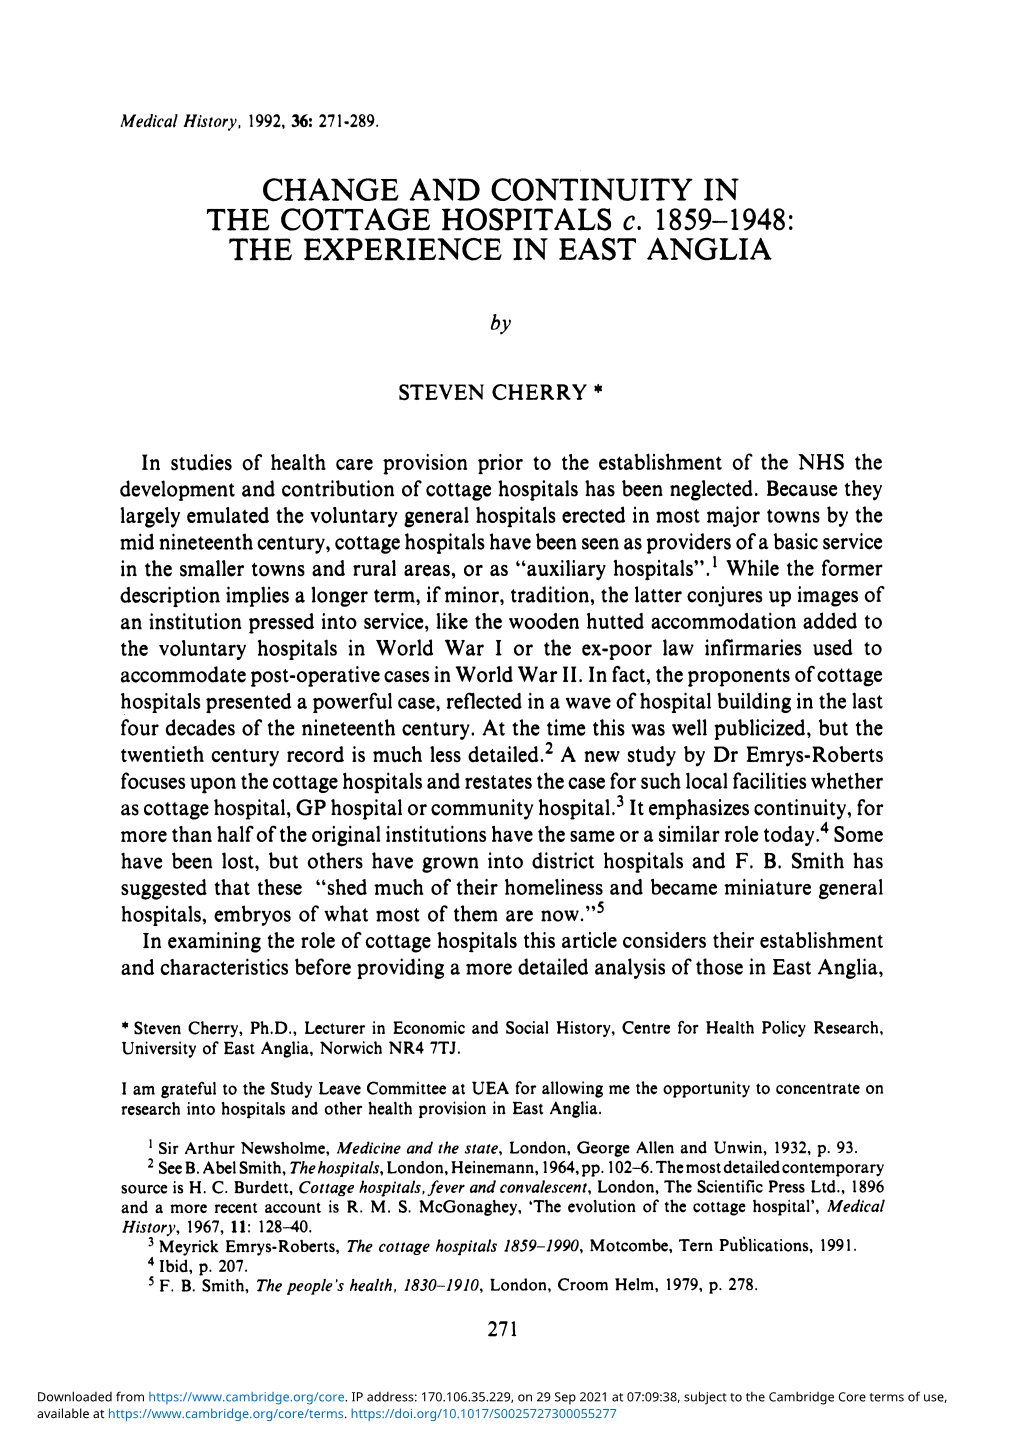 CHANGE and CONTINUITY in the COTTAGE HOSPITALS C. 1859-1948: the EXPERIENCE in EAST ANGLIA